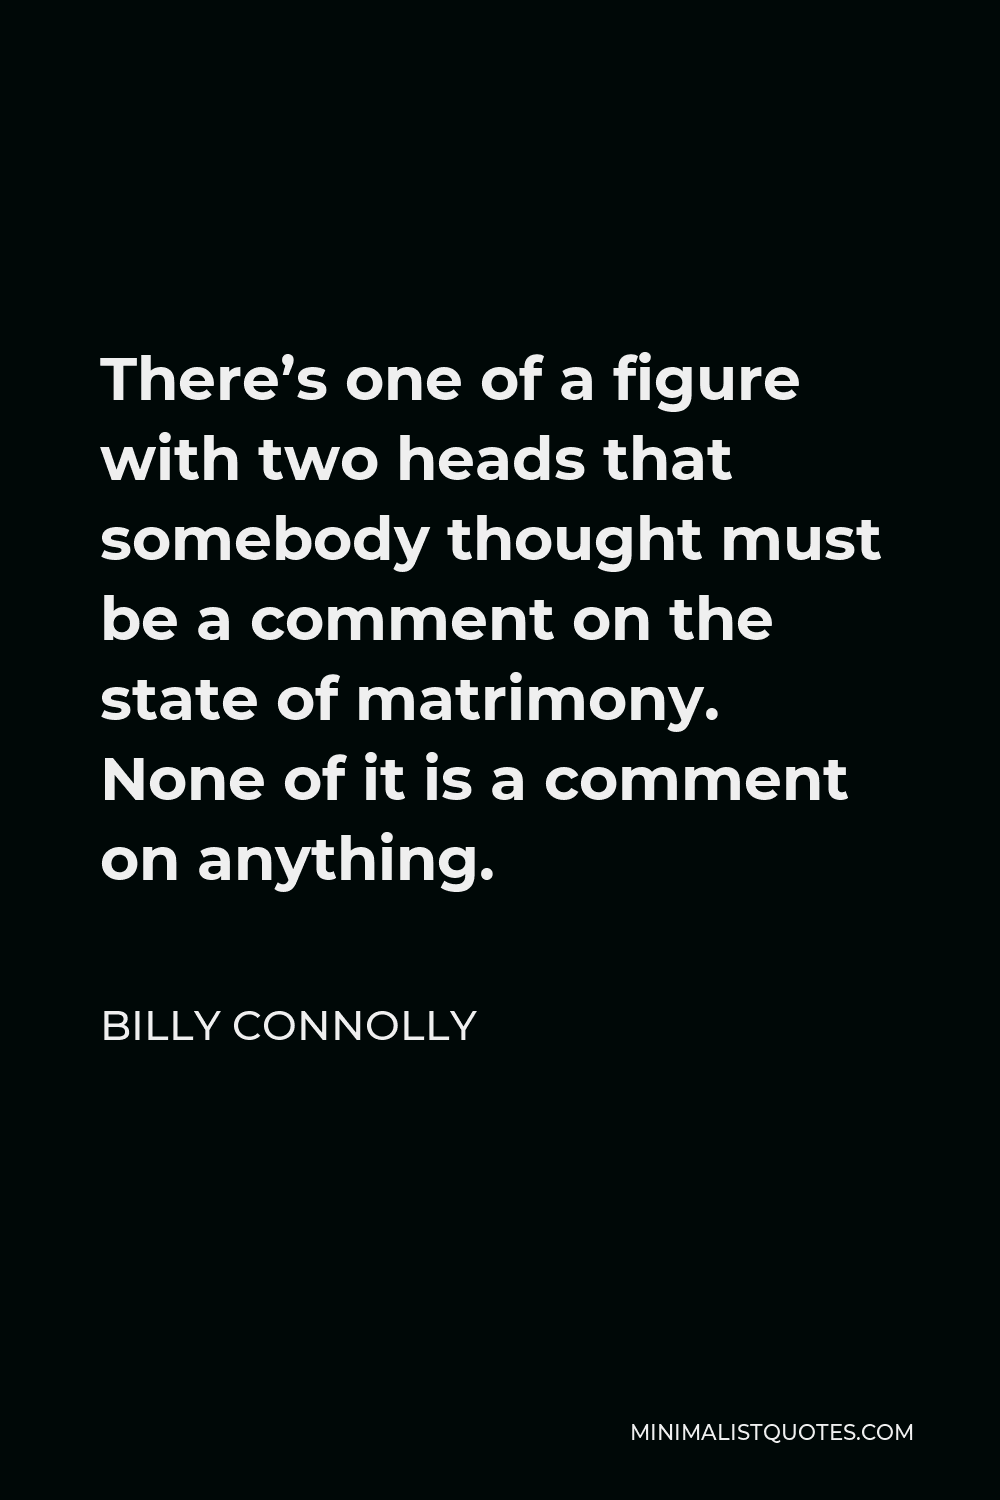 Billy Connolly Quote - There’s one of a figure with two heads that somebody thought must be a comment on the state of matrimony. None of it is a comment on anything.